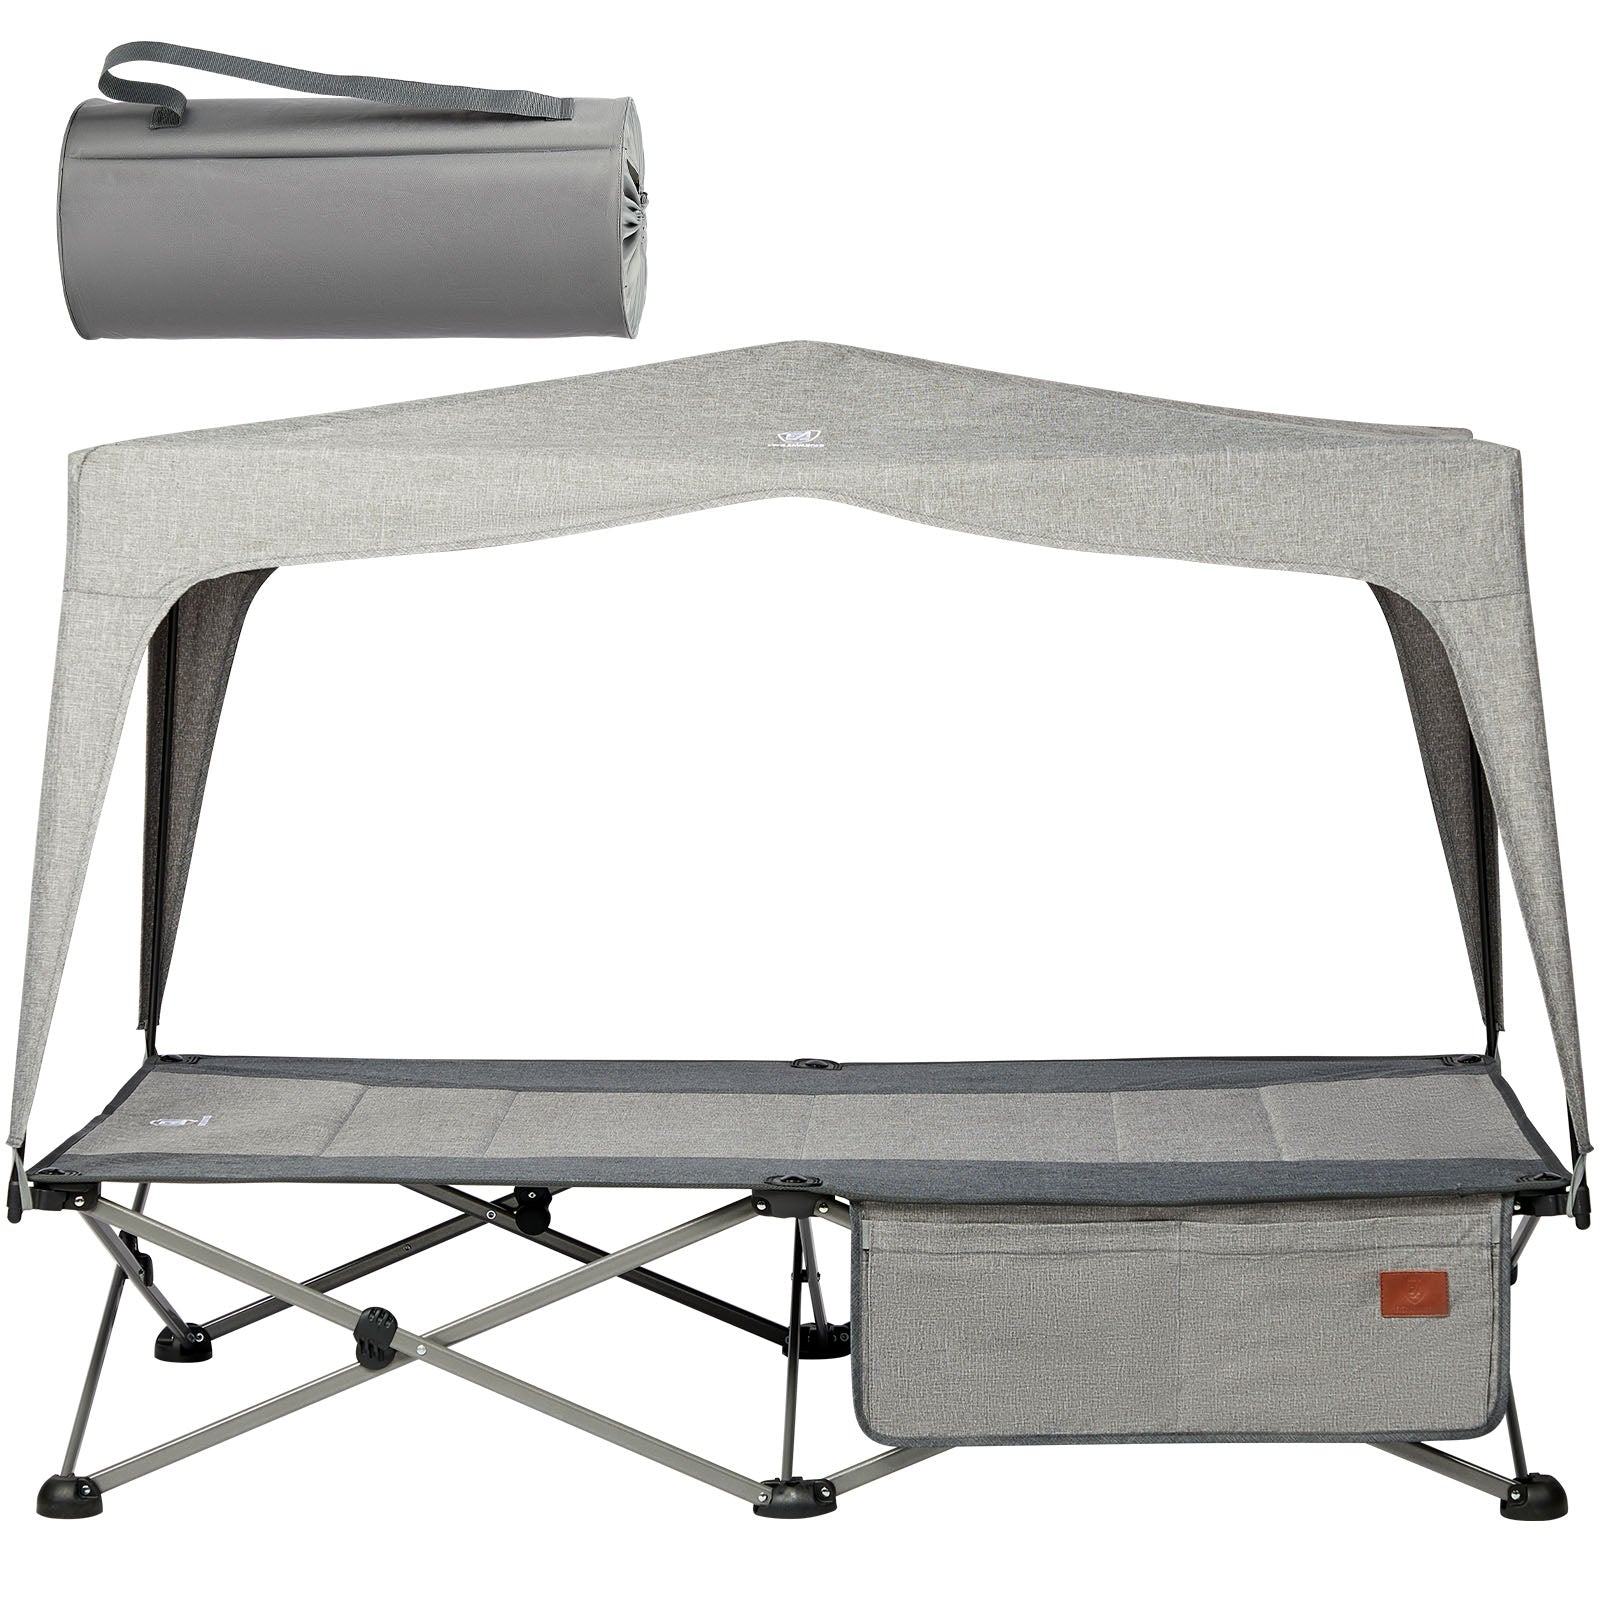 Ever Advanced Portable Toddler Travel Cot with Canopy